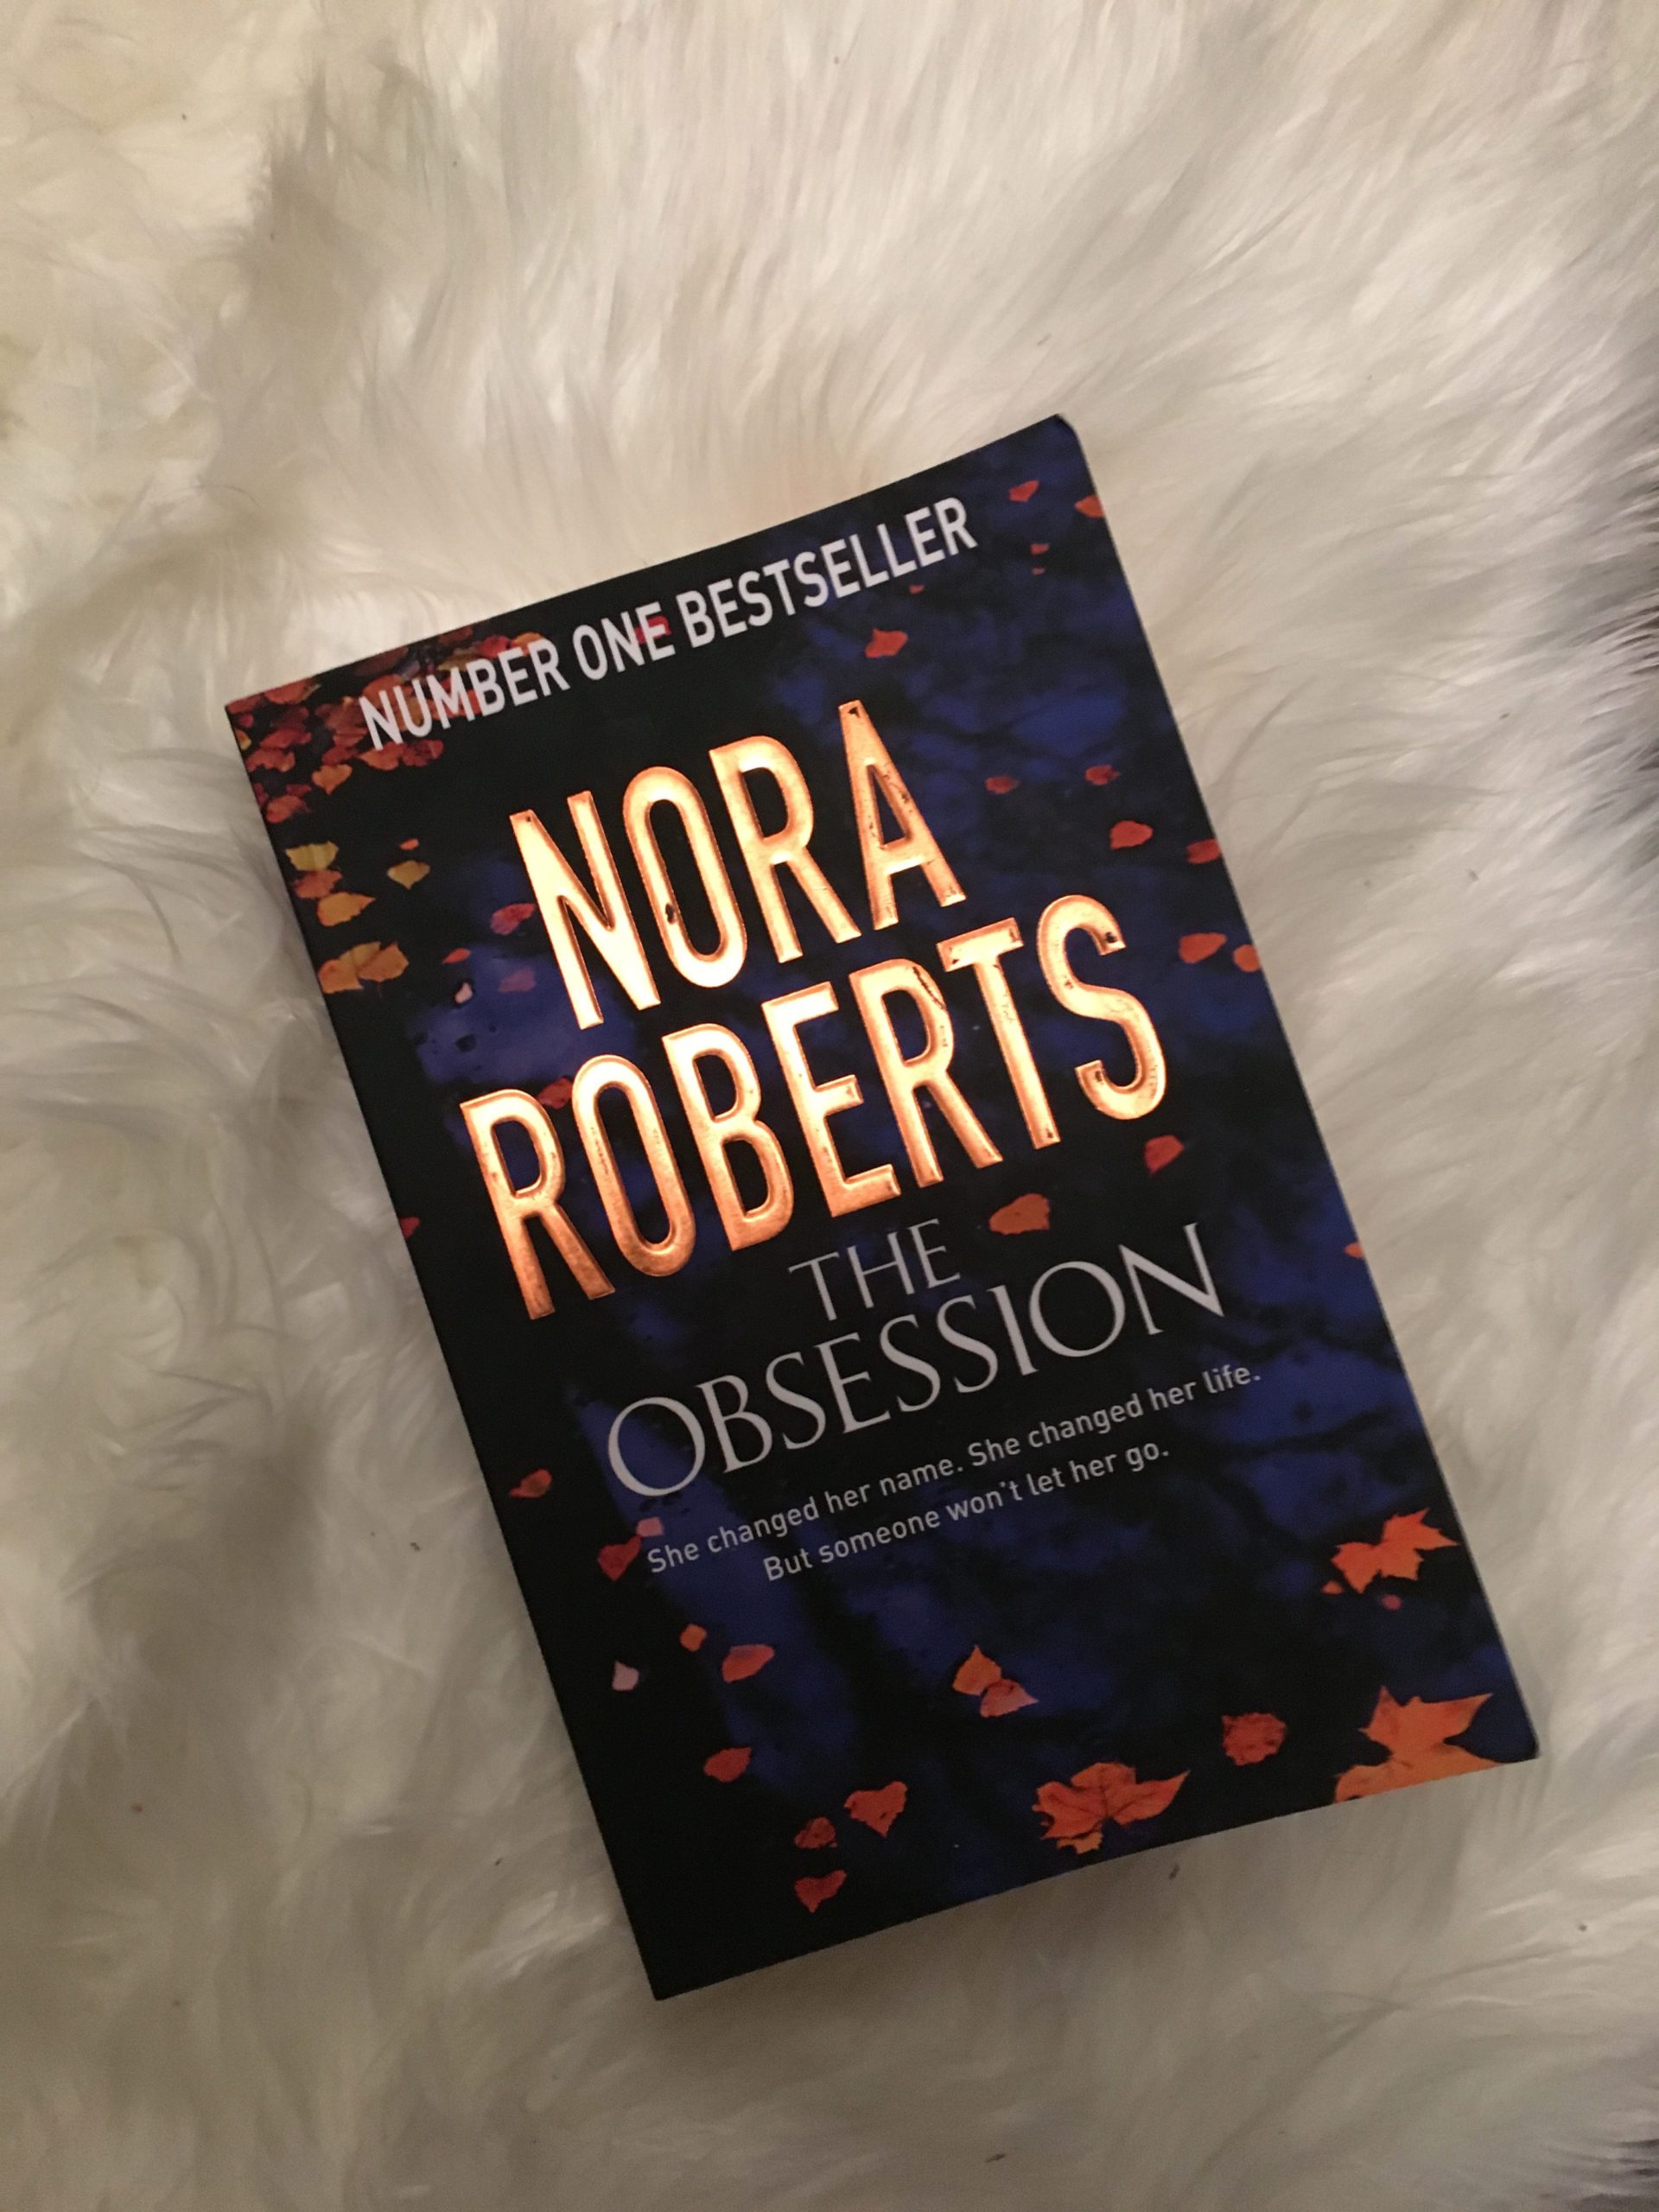 BOOK REVIEW: THE OBSESSION NORA ROBERTS